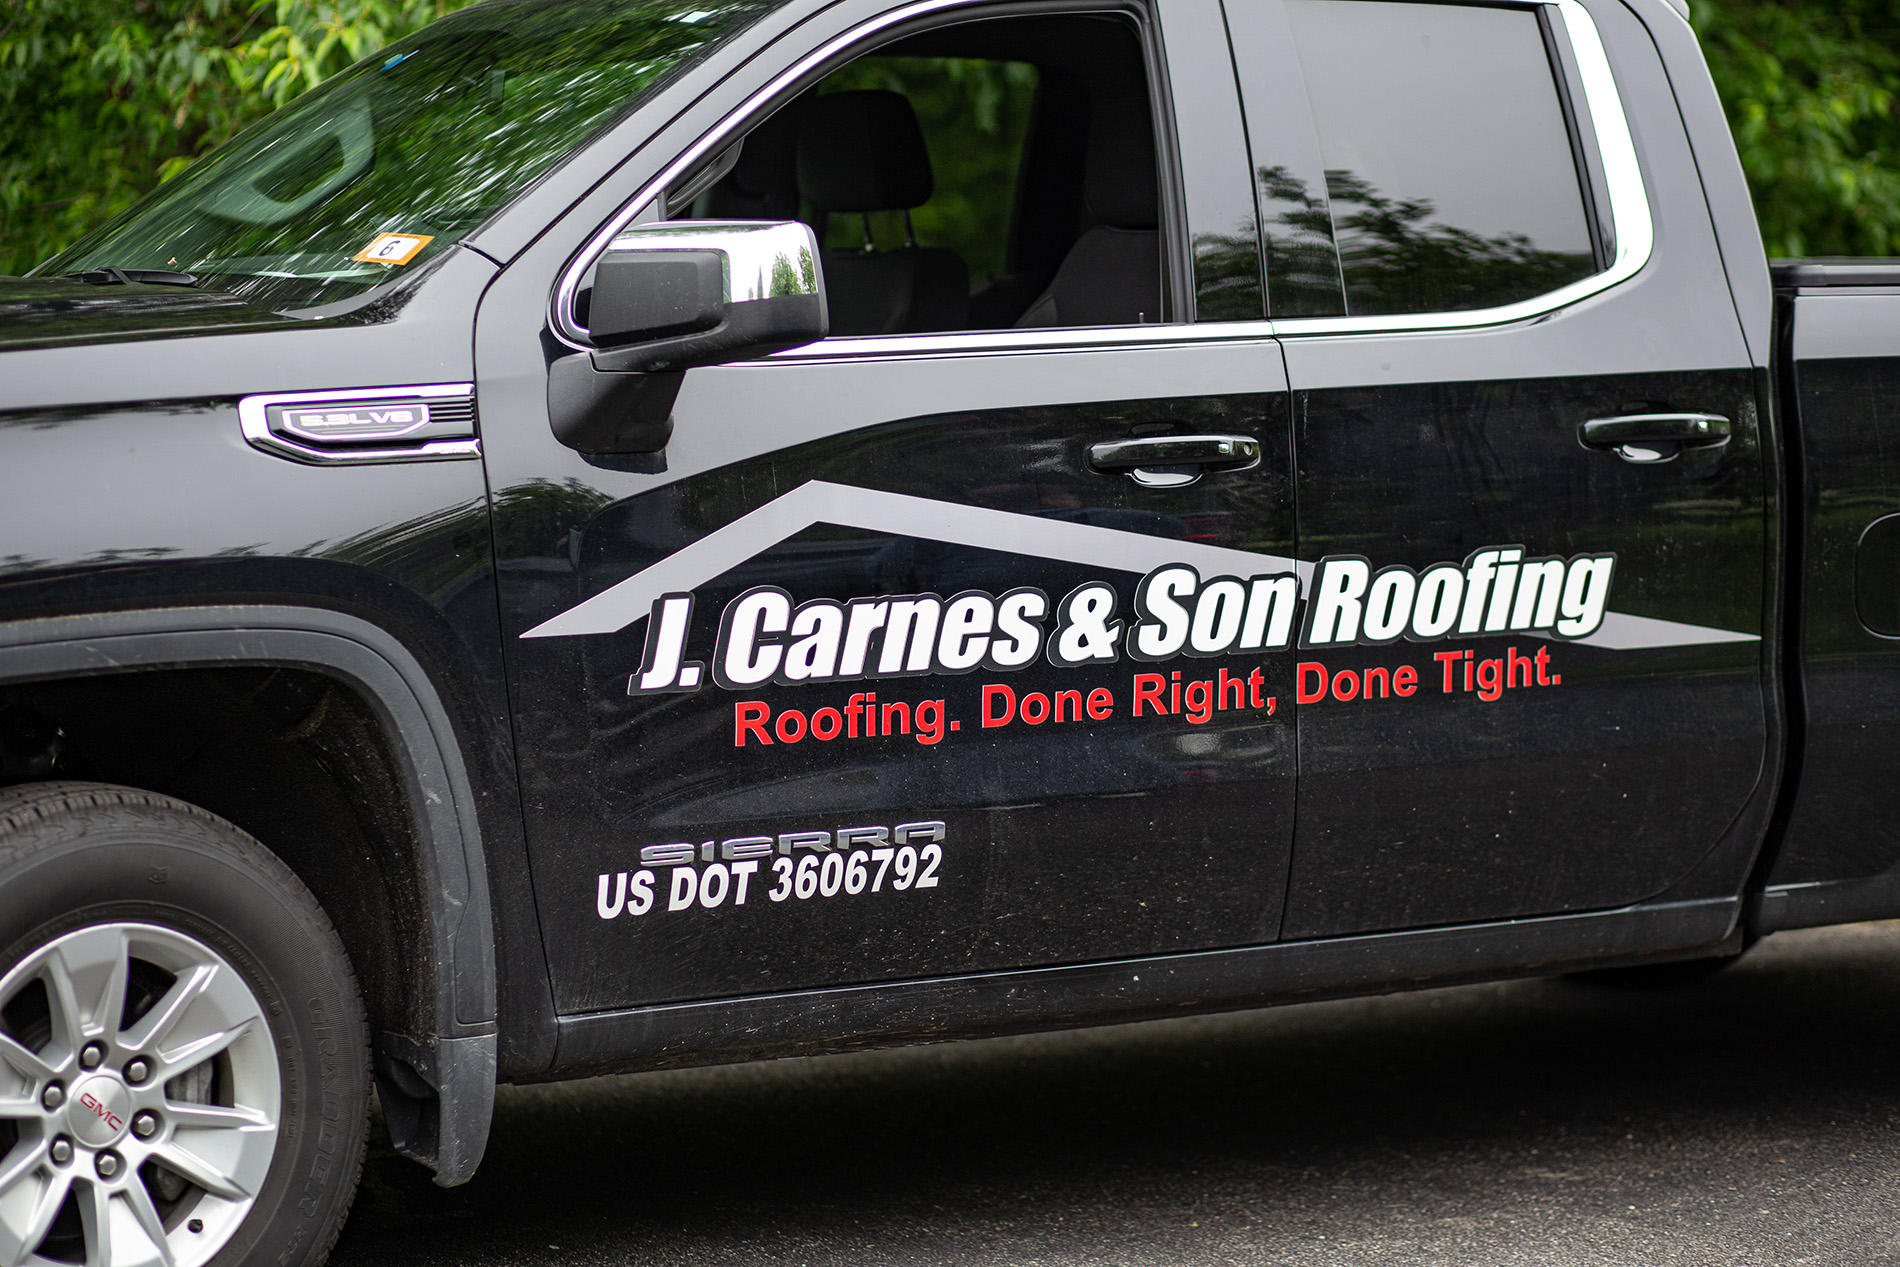 Roofer in Chester, NH